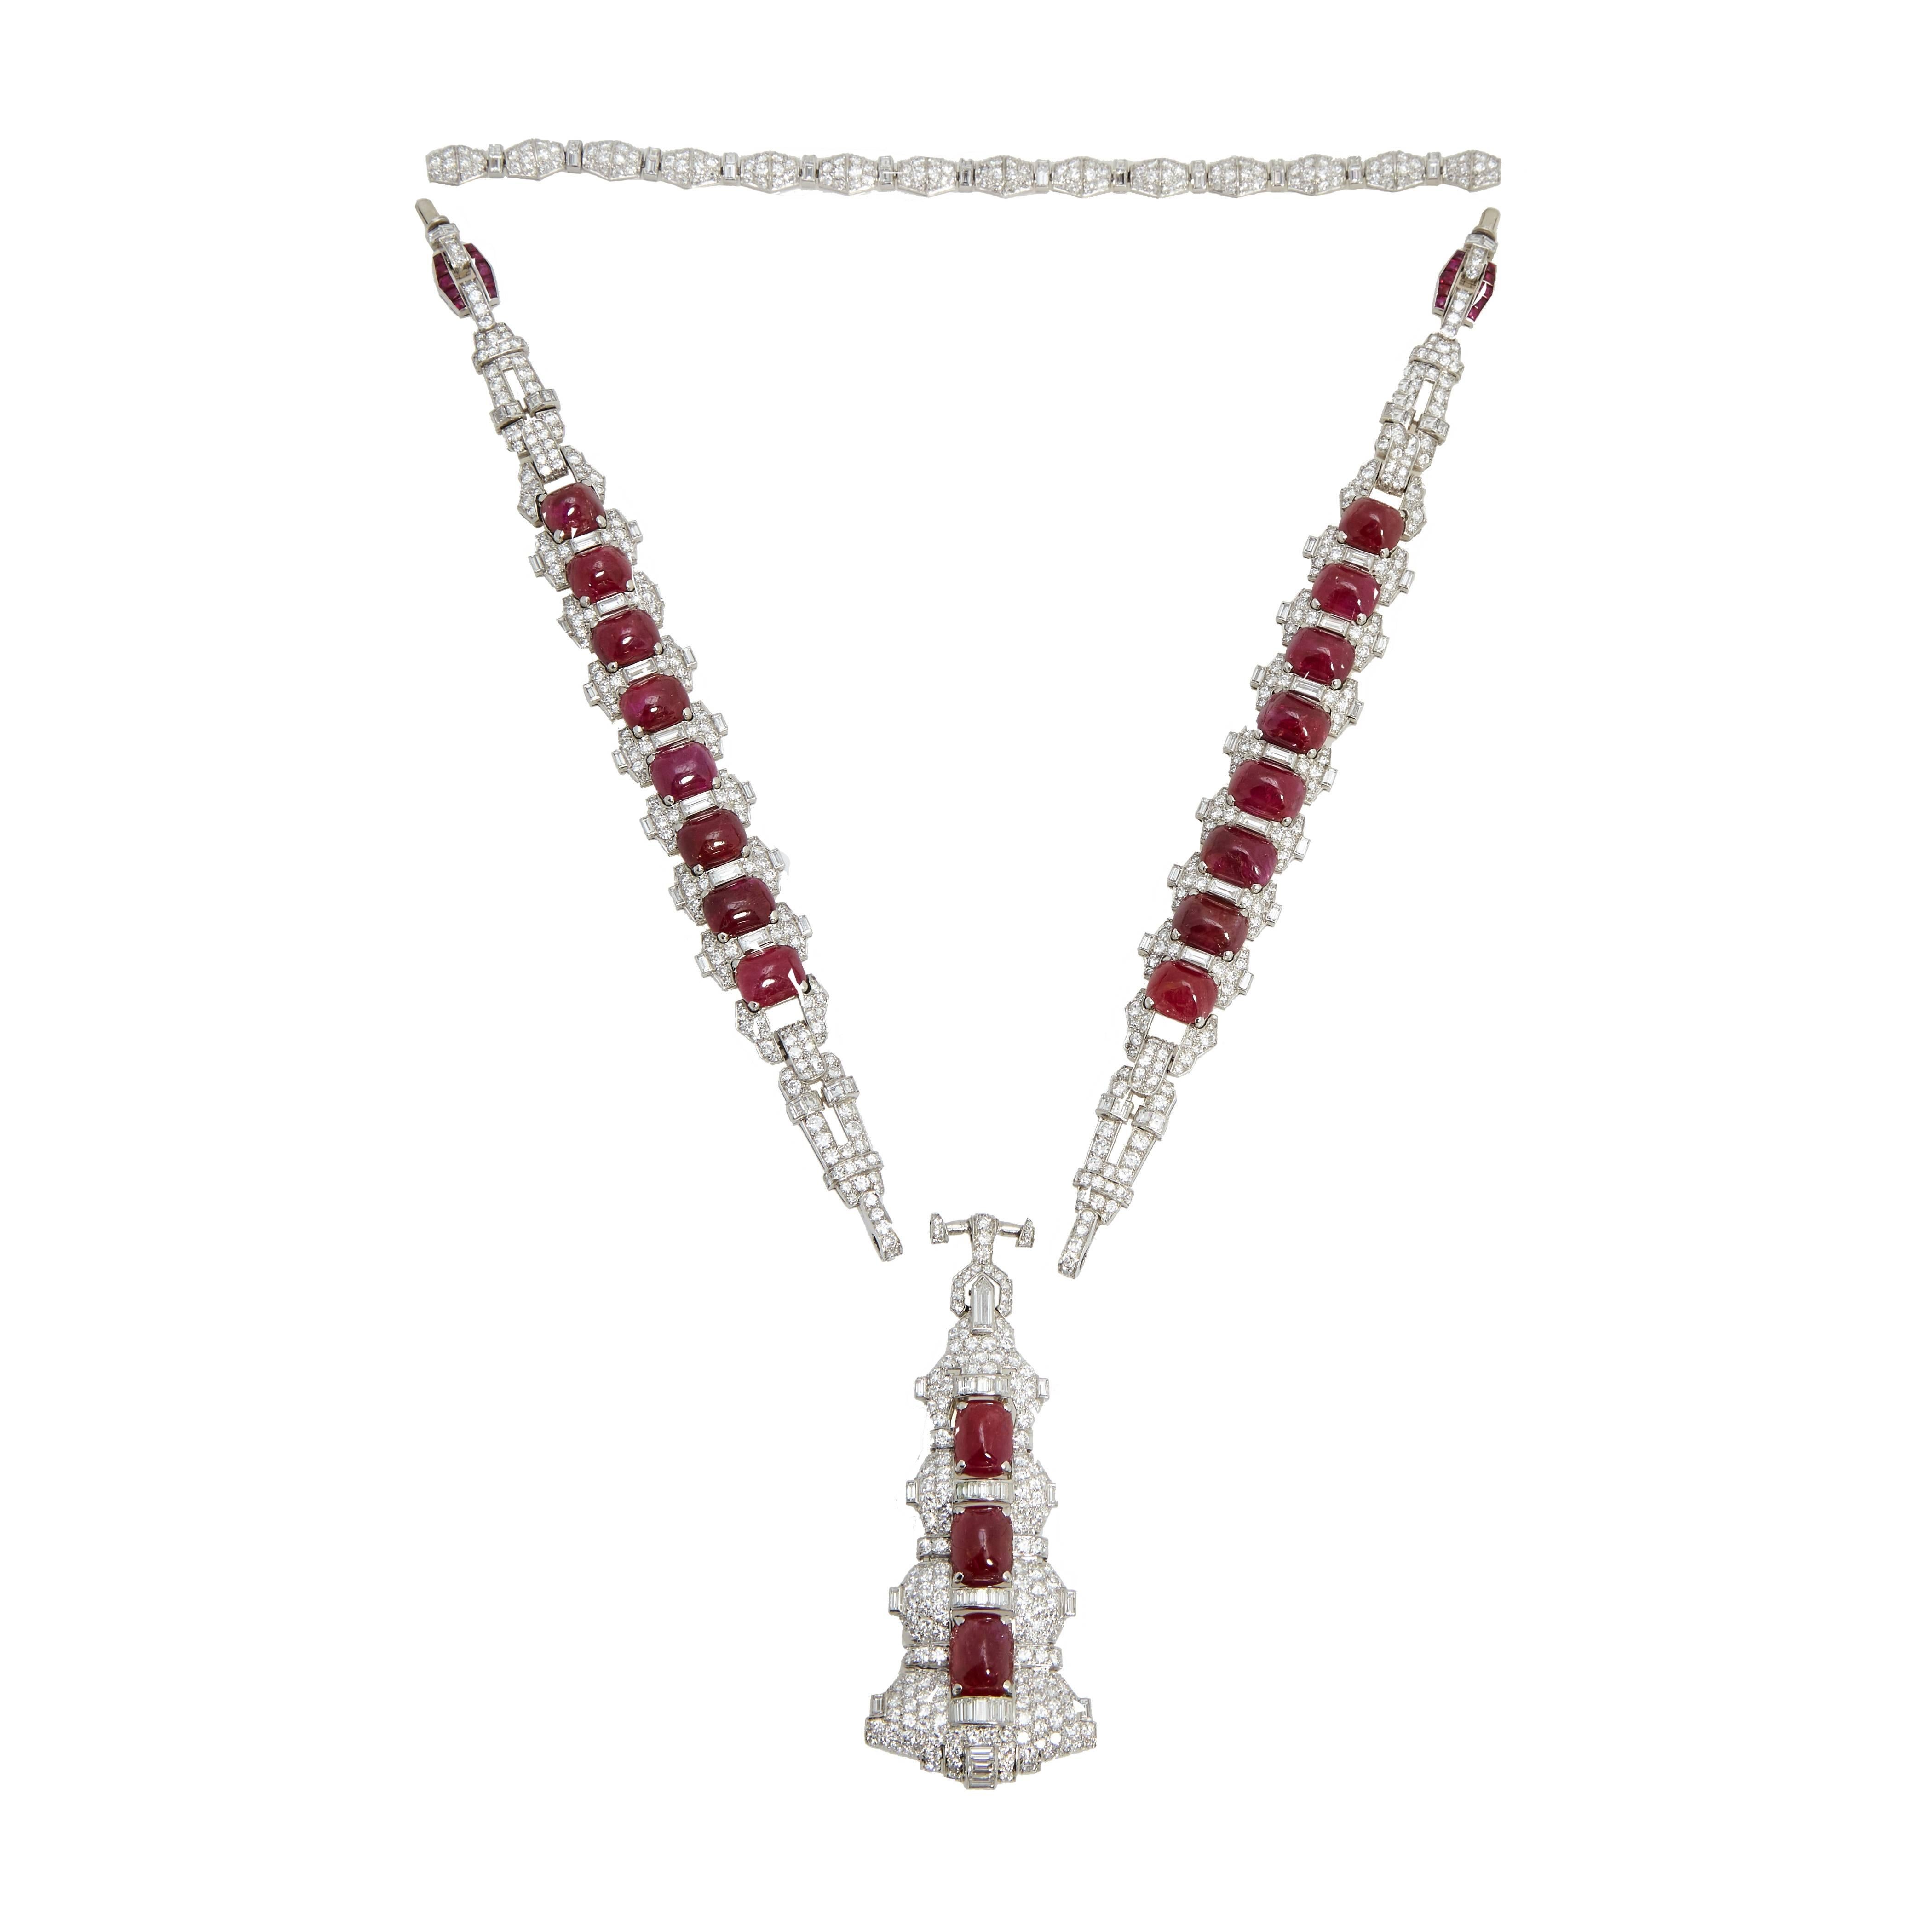 A Magnificent Art Deco Sautoir Necklace with diamonds (40 cts) and unheated Burmese cabochon rubies (110 cts), mounted on platinum. Impeccably detachable to convert into two bracelets and brooch. Made in Italy, circa 1925.